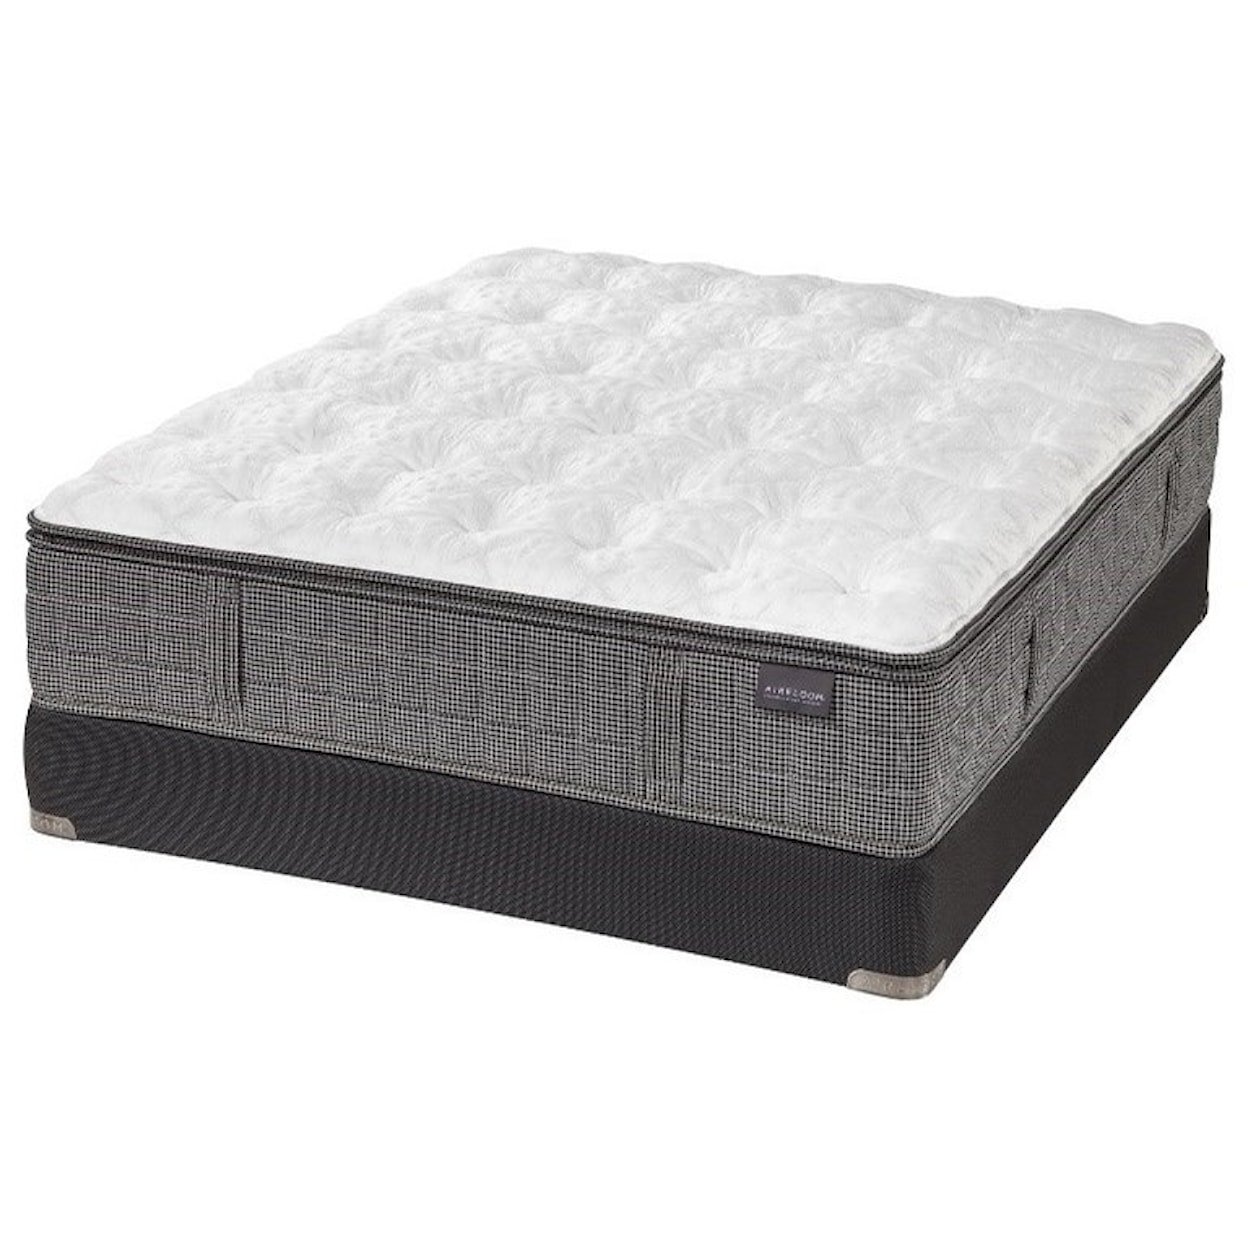 Aireloom Bedding Onyx Dusk Luxetop King Coil on Coil Plush Luxe Top Mattress